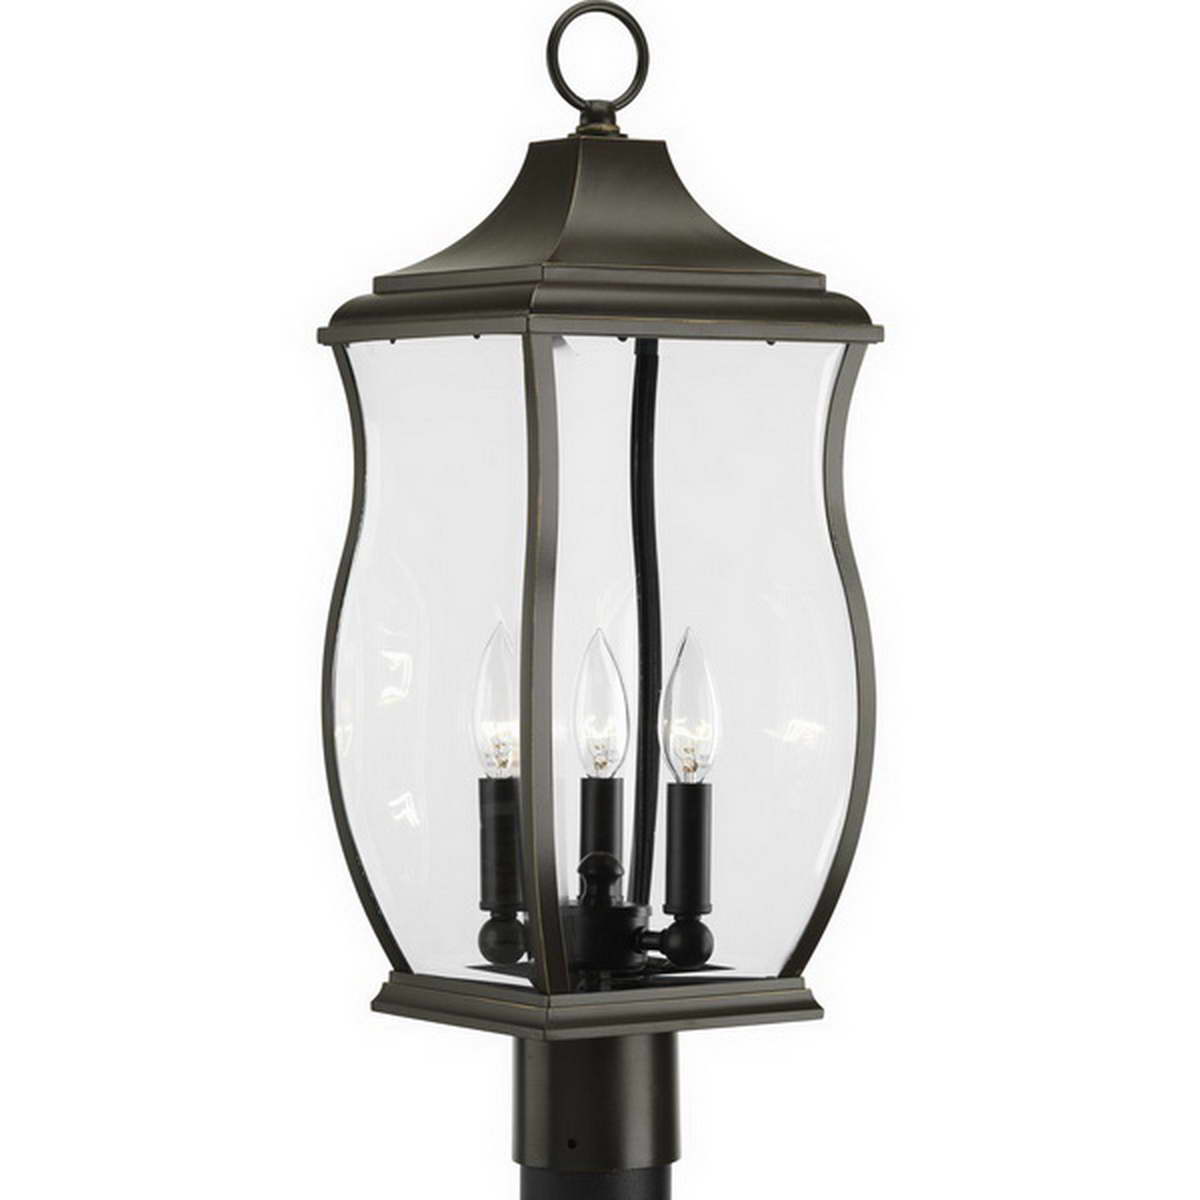 Township 23 In. 3 Lights Lantern head Oil Rubbed Bronze Finish